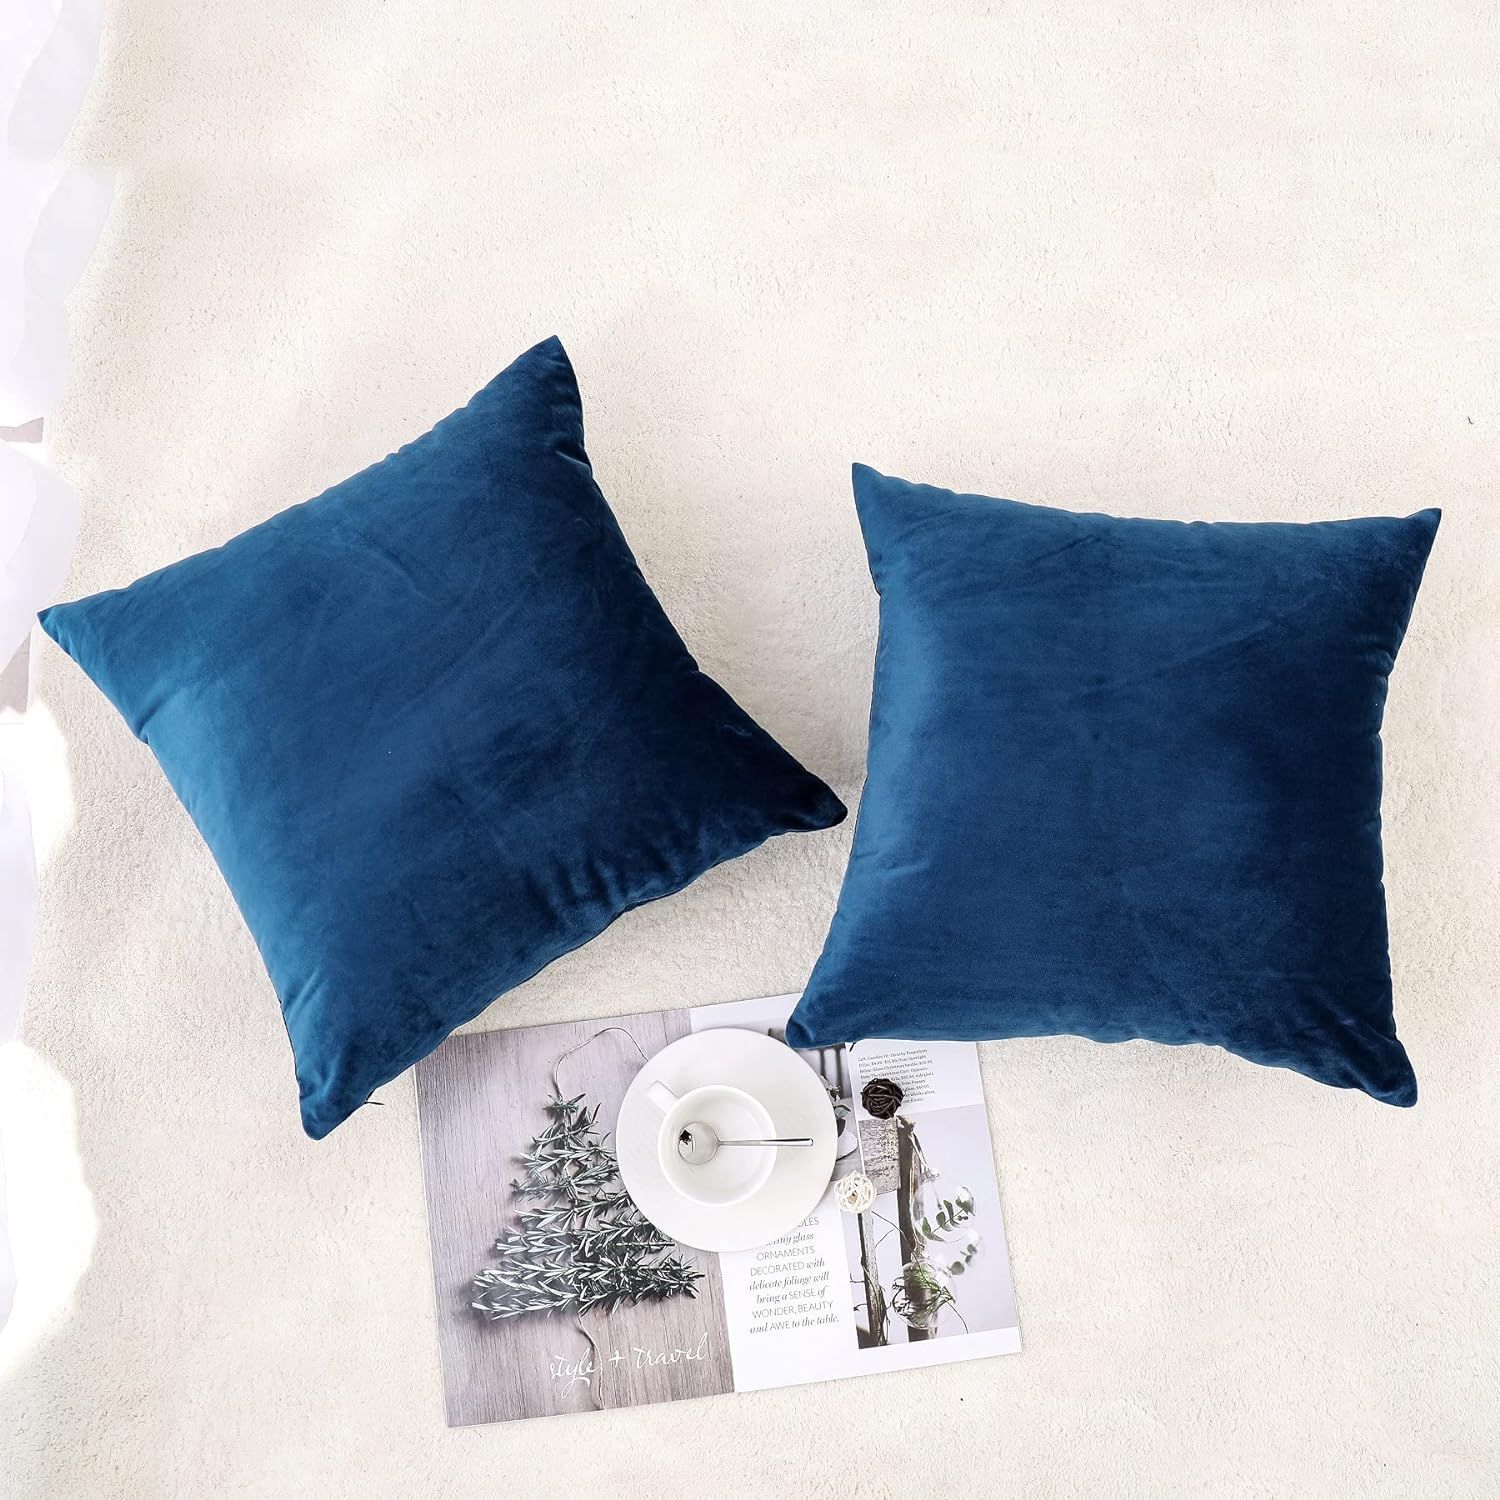 NiNi ALL Decorative Throw Pillow Covers Velvet 18x18 Inch Pack of 2 Blue Cushion Covers Soft for ... | Amazon (US)